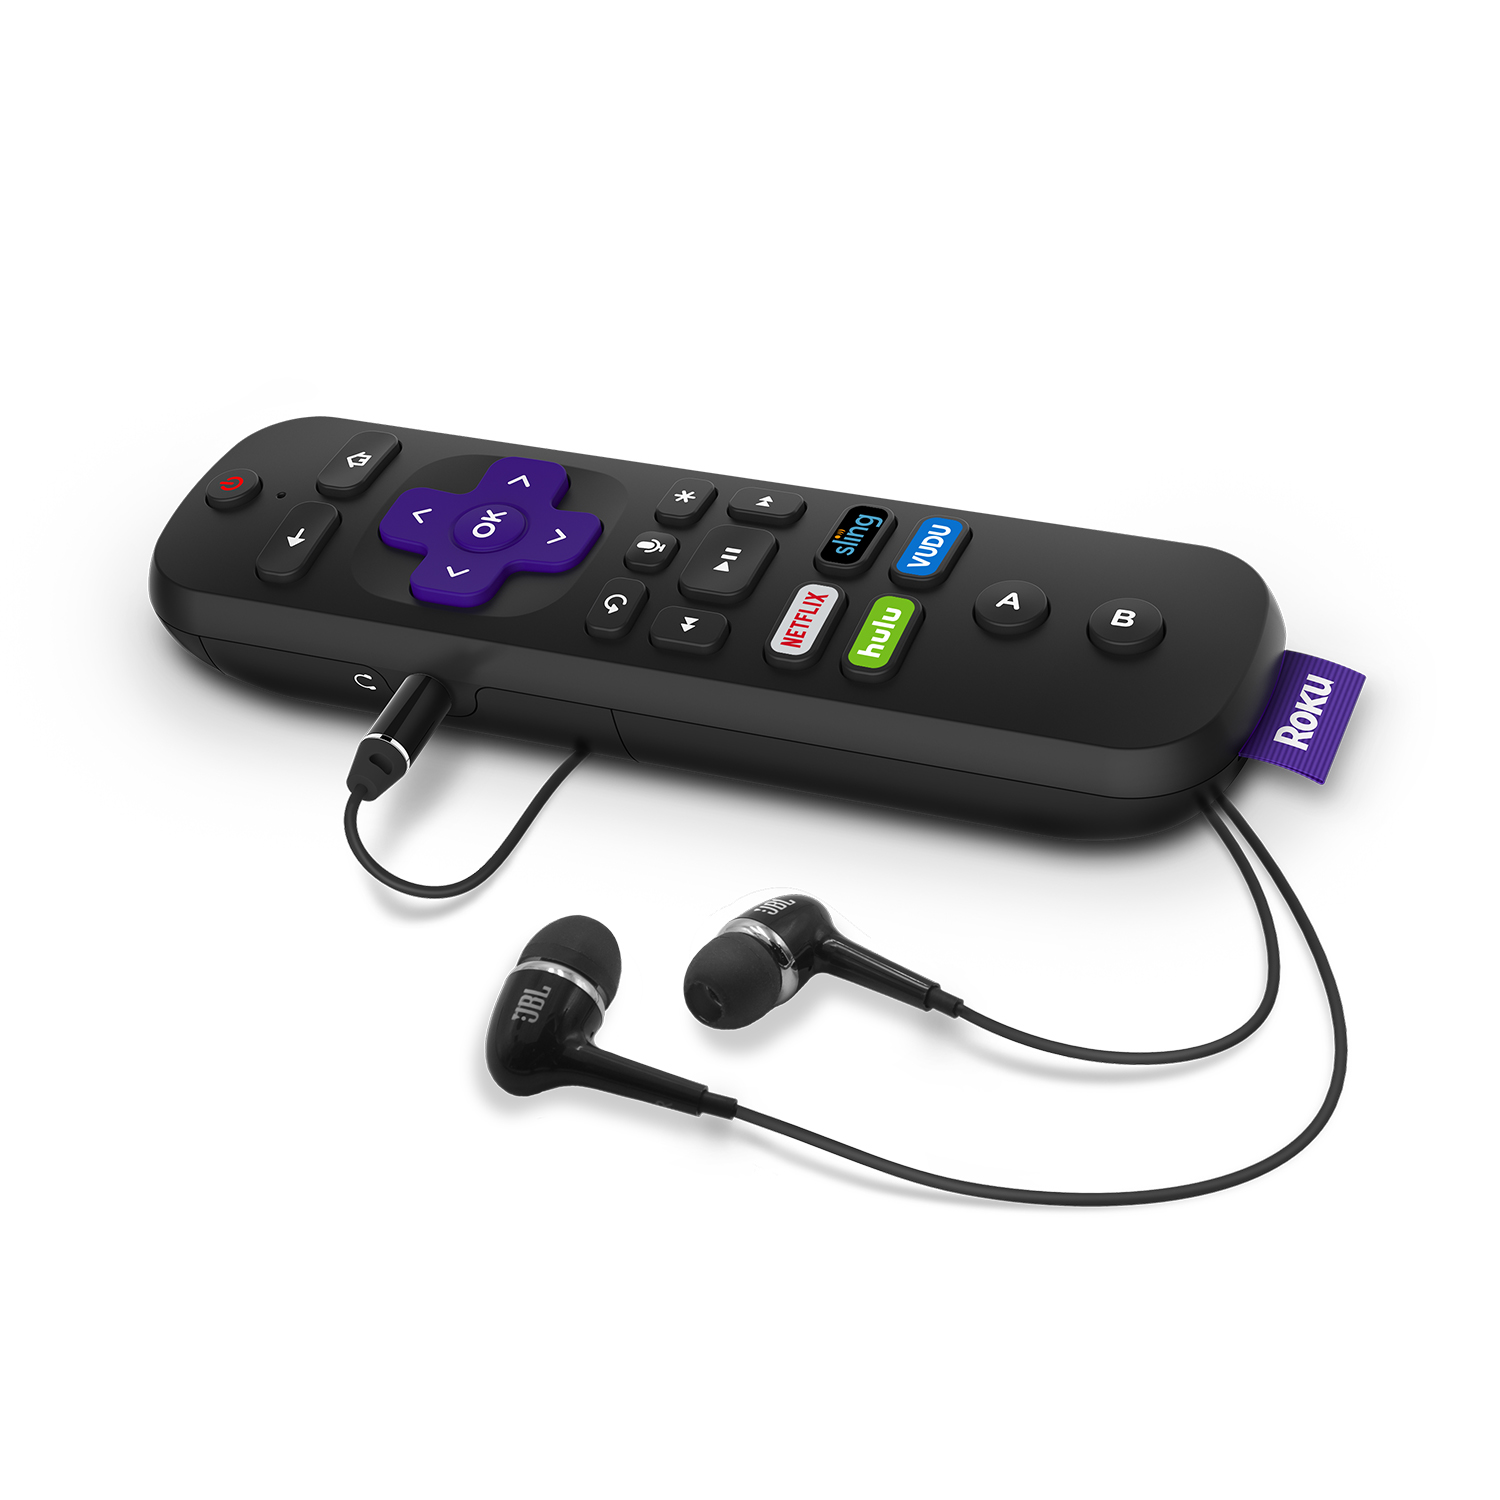 Roku Ultra 4K HDR Streaming Player (2018) with JBL headphones - image 5 of 7